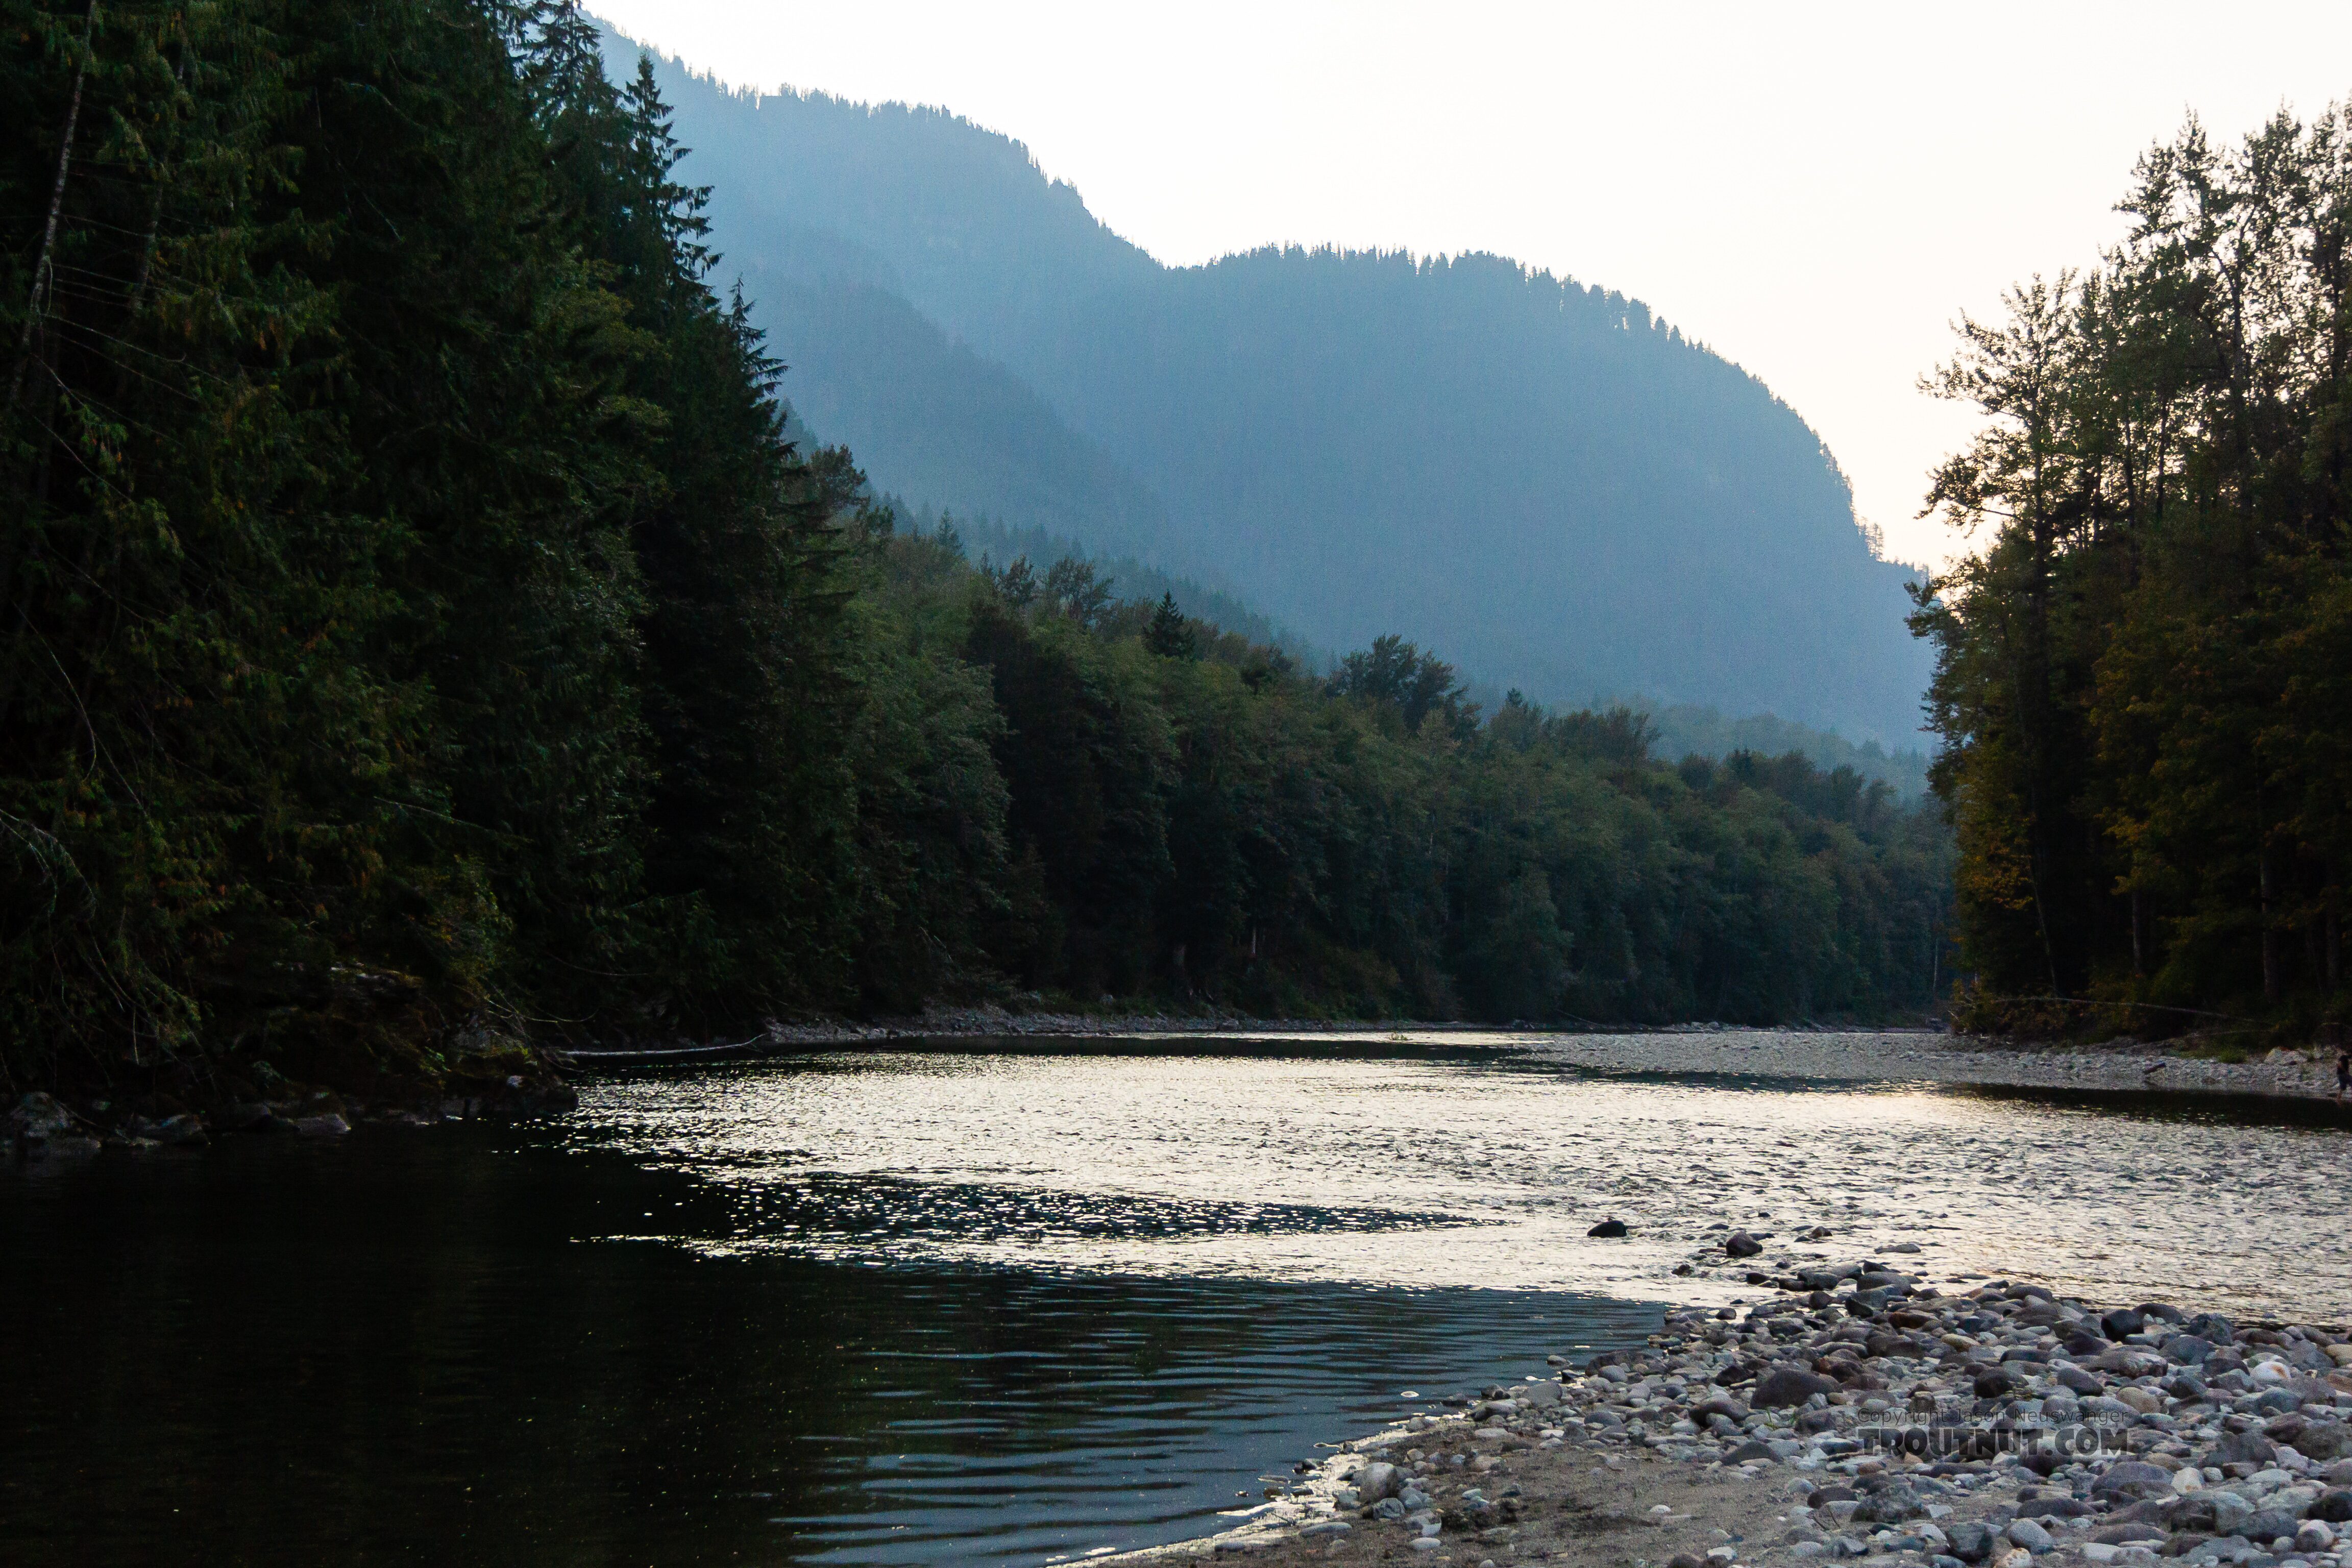  From the South Fork Skykomish River in Washington.